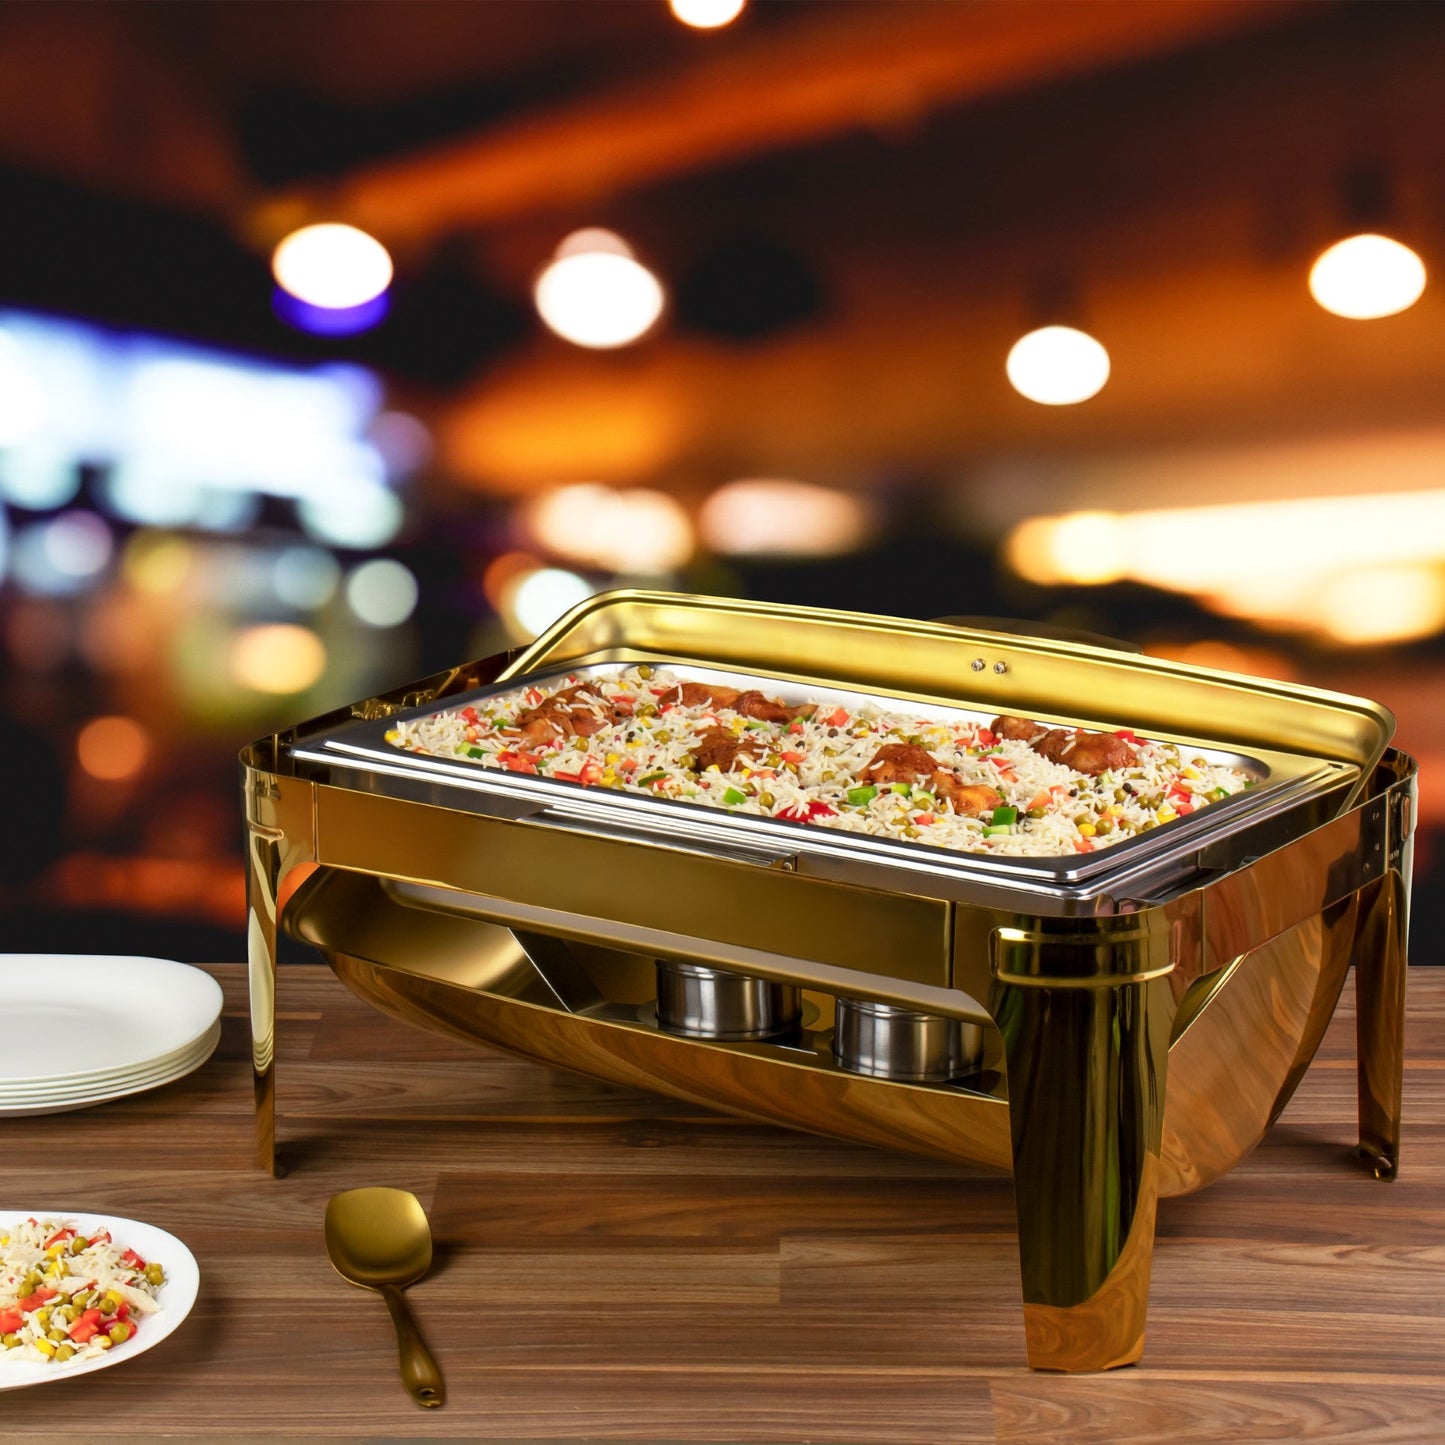 SQ Professional Banquet Chafing Dish with Roll Top Oblong Gold 9L 10856 (Big Parcel Rate)